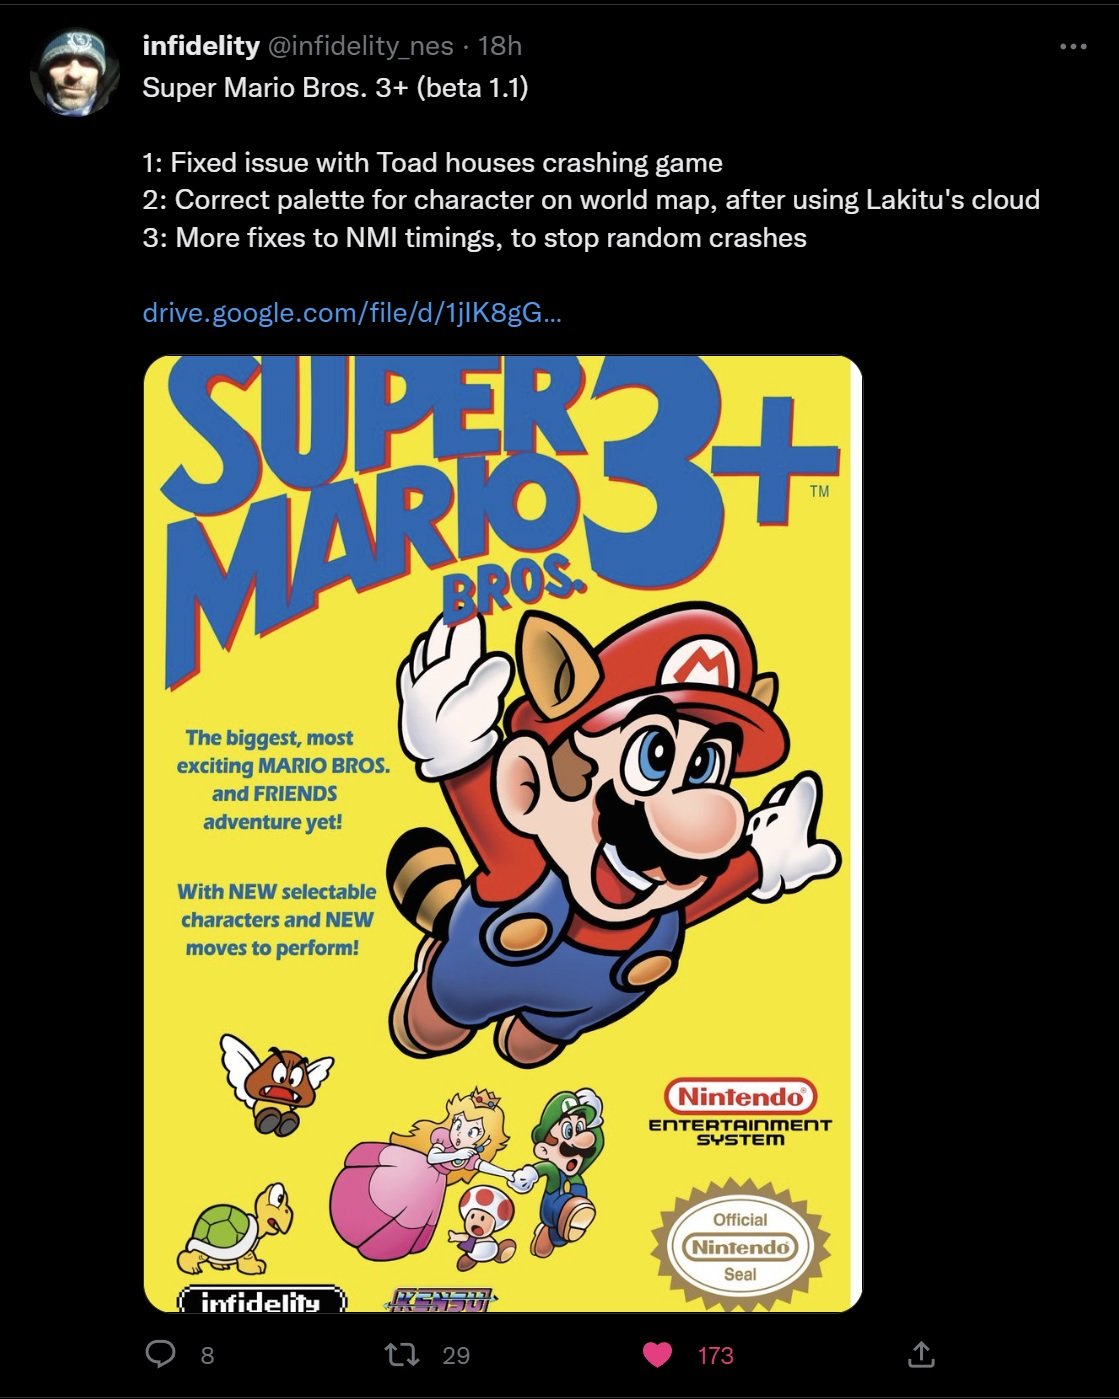 Super Mario Bros. 3+ romhack brings Luigi, Toad and Peach with unique  mechanics ala SMB2 into SMB3 | Page 5 | GBAtemp.net - The Independent Video  Game Community